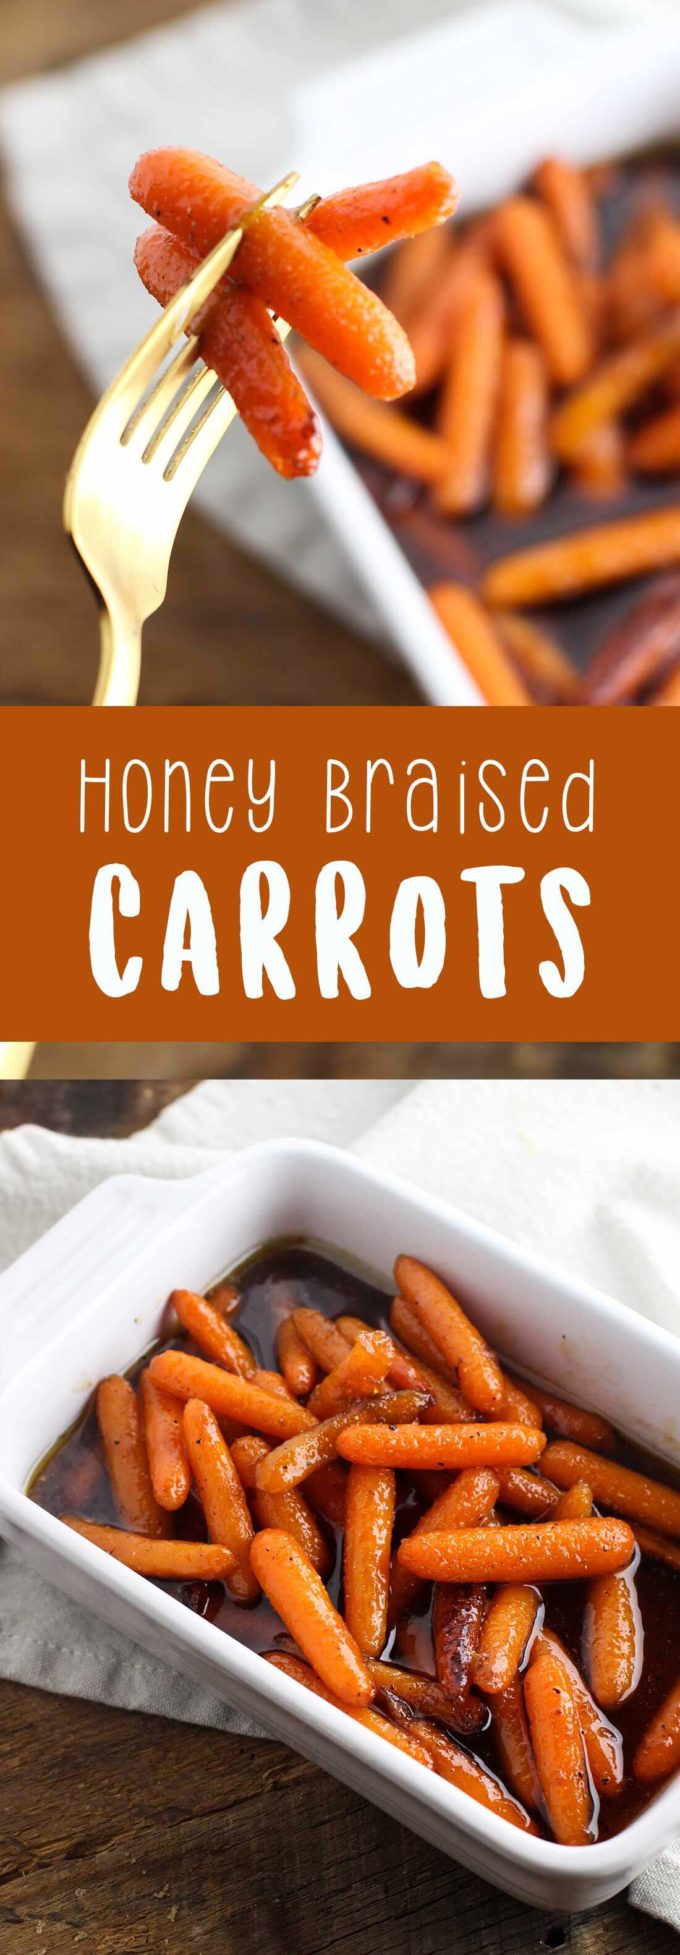 Delicious honey braised carrots perfect for a side dish